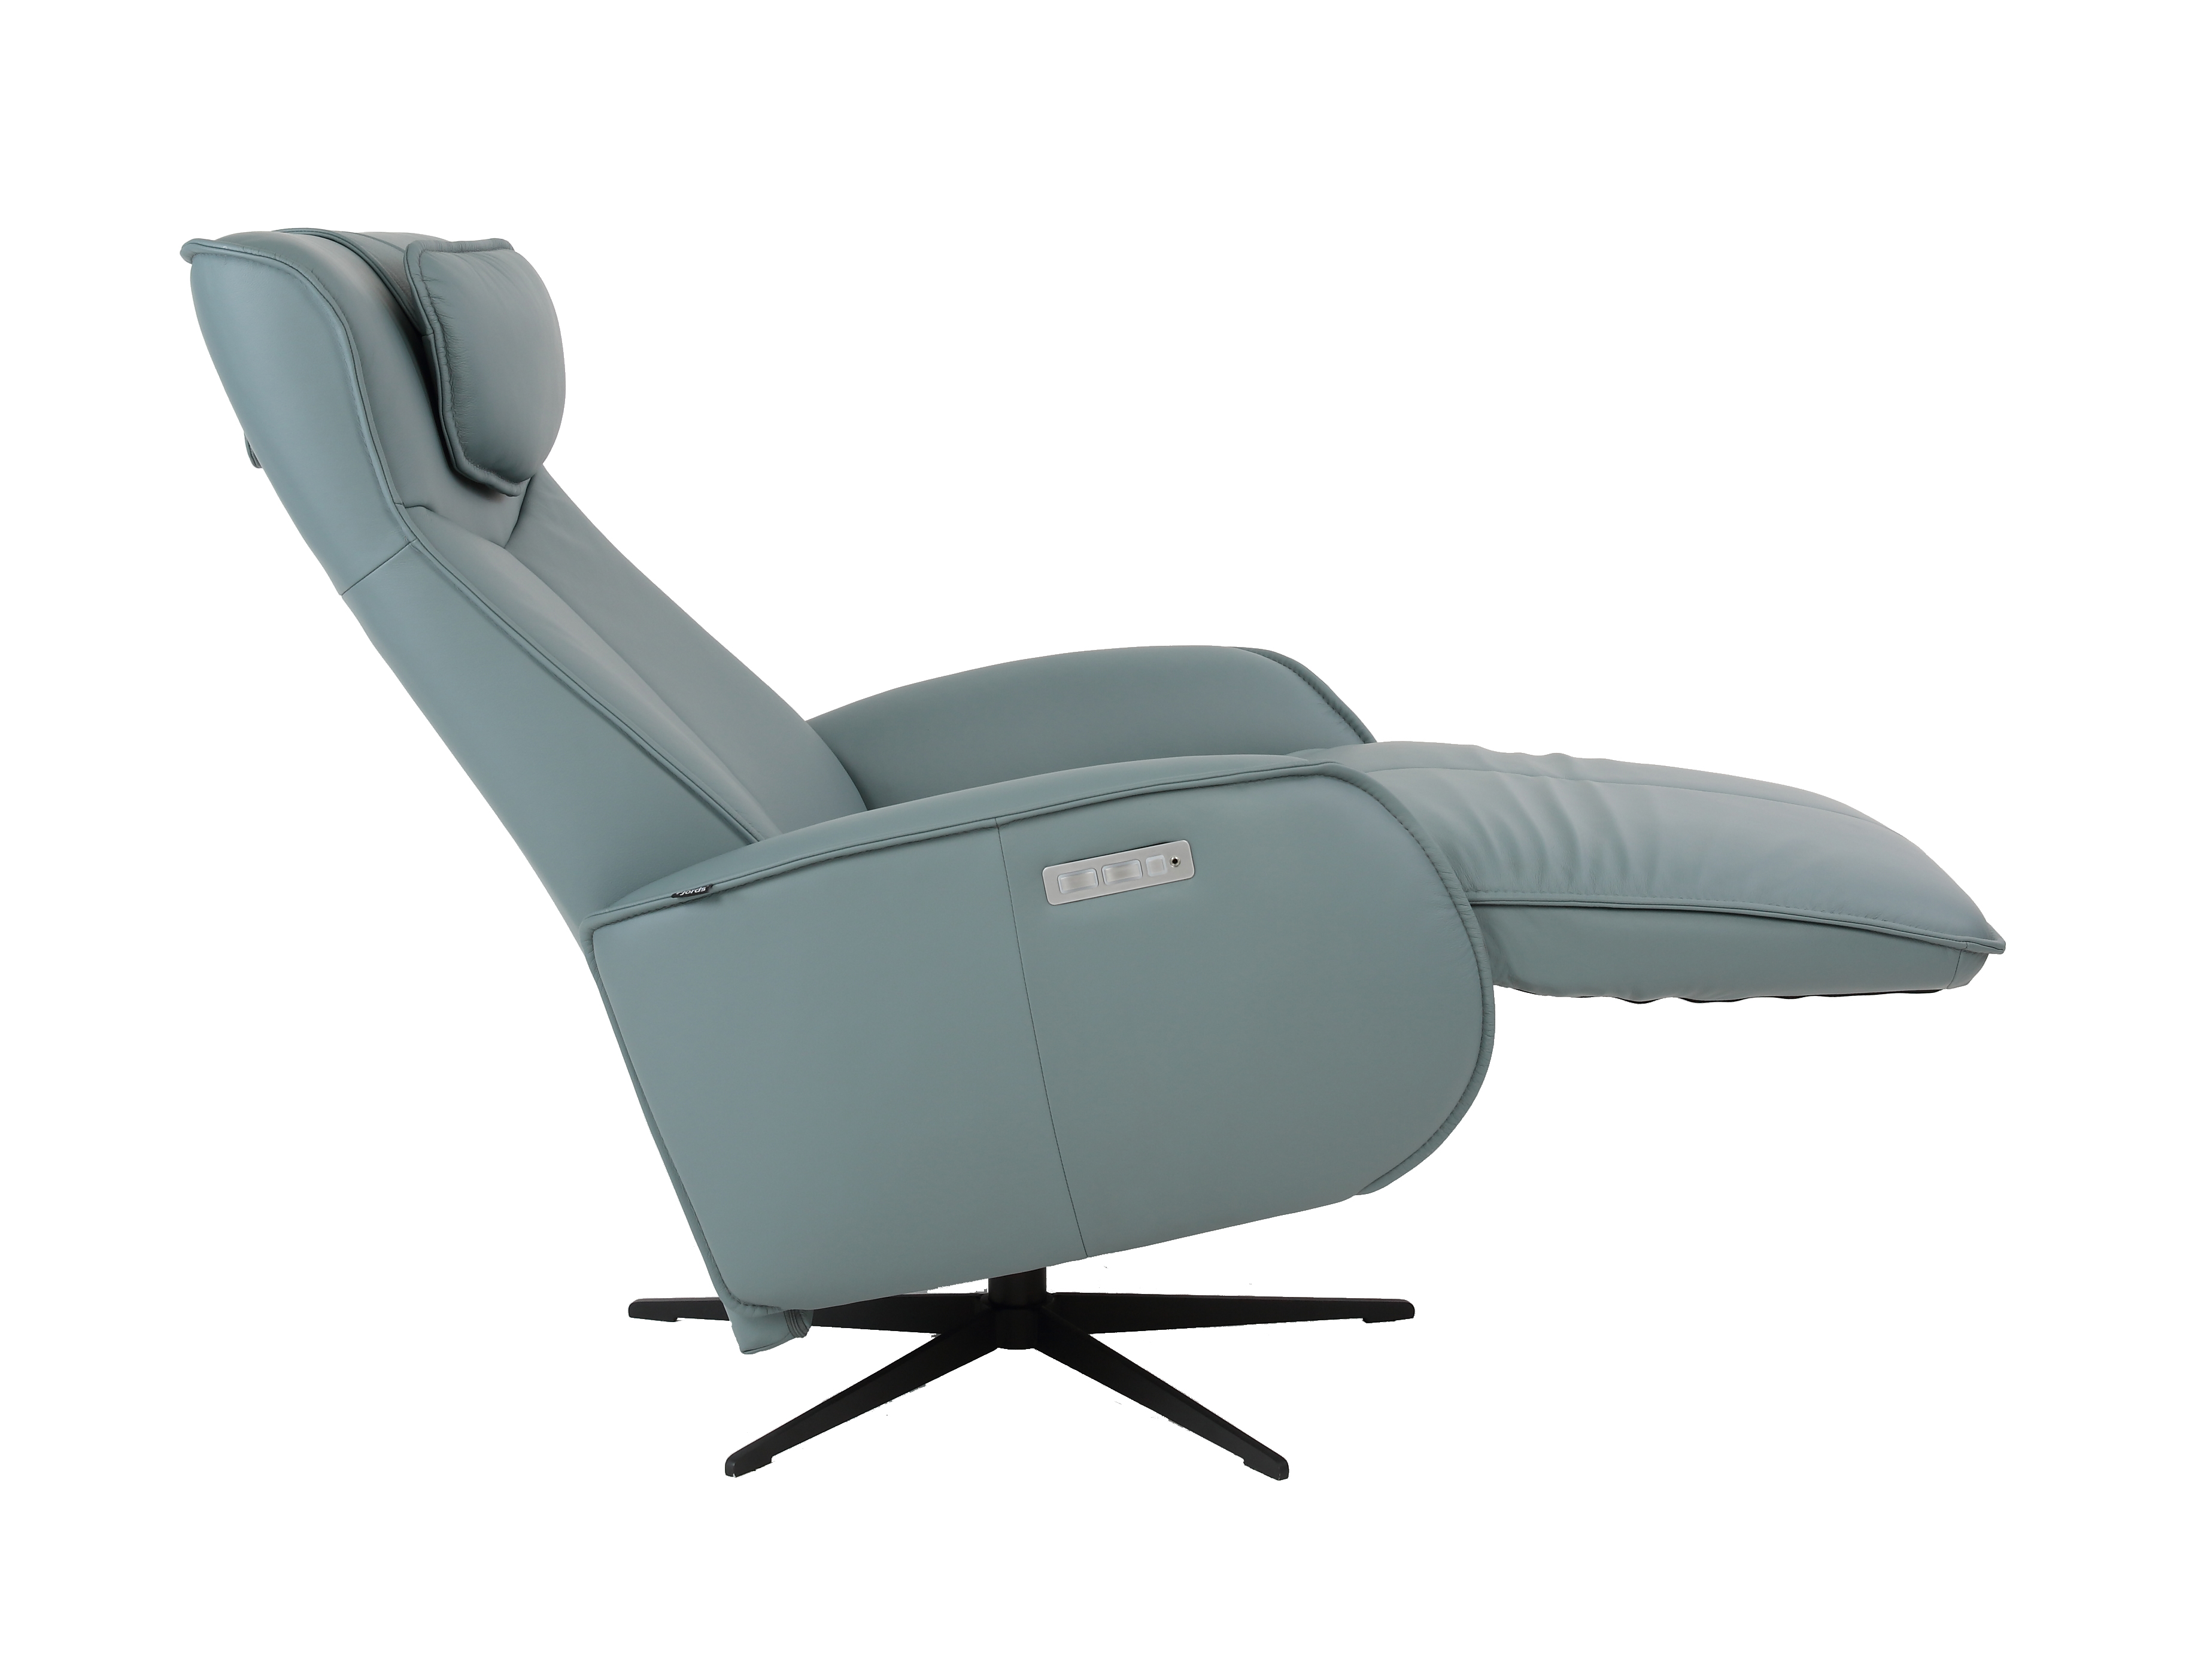 axel-power-recliner-sideview